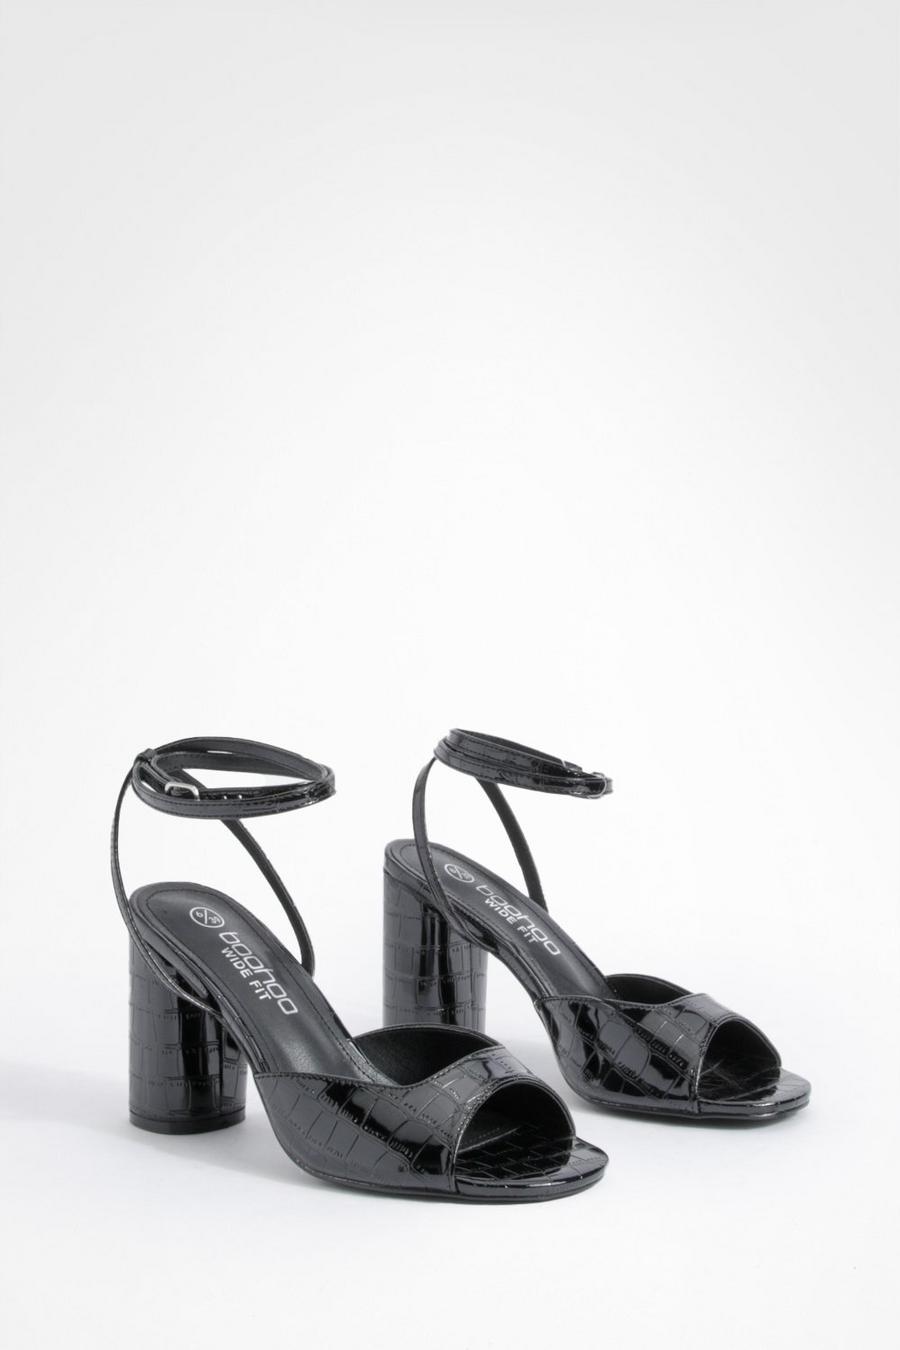 Black Wide Fit Croc Rounded Heel Strappy Barely There Heels 